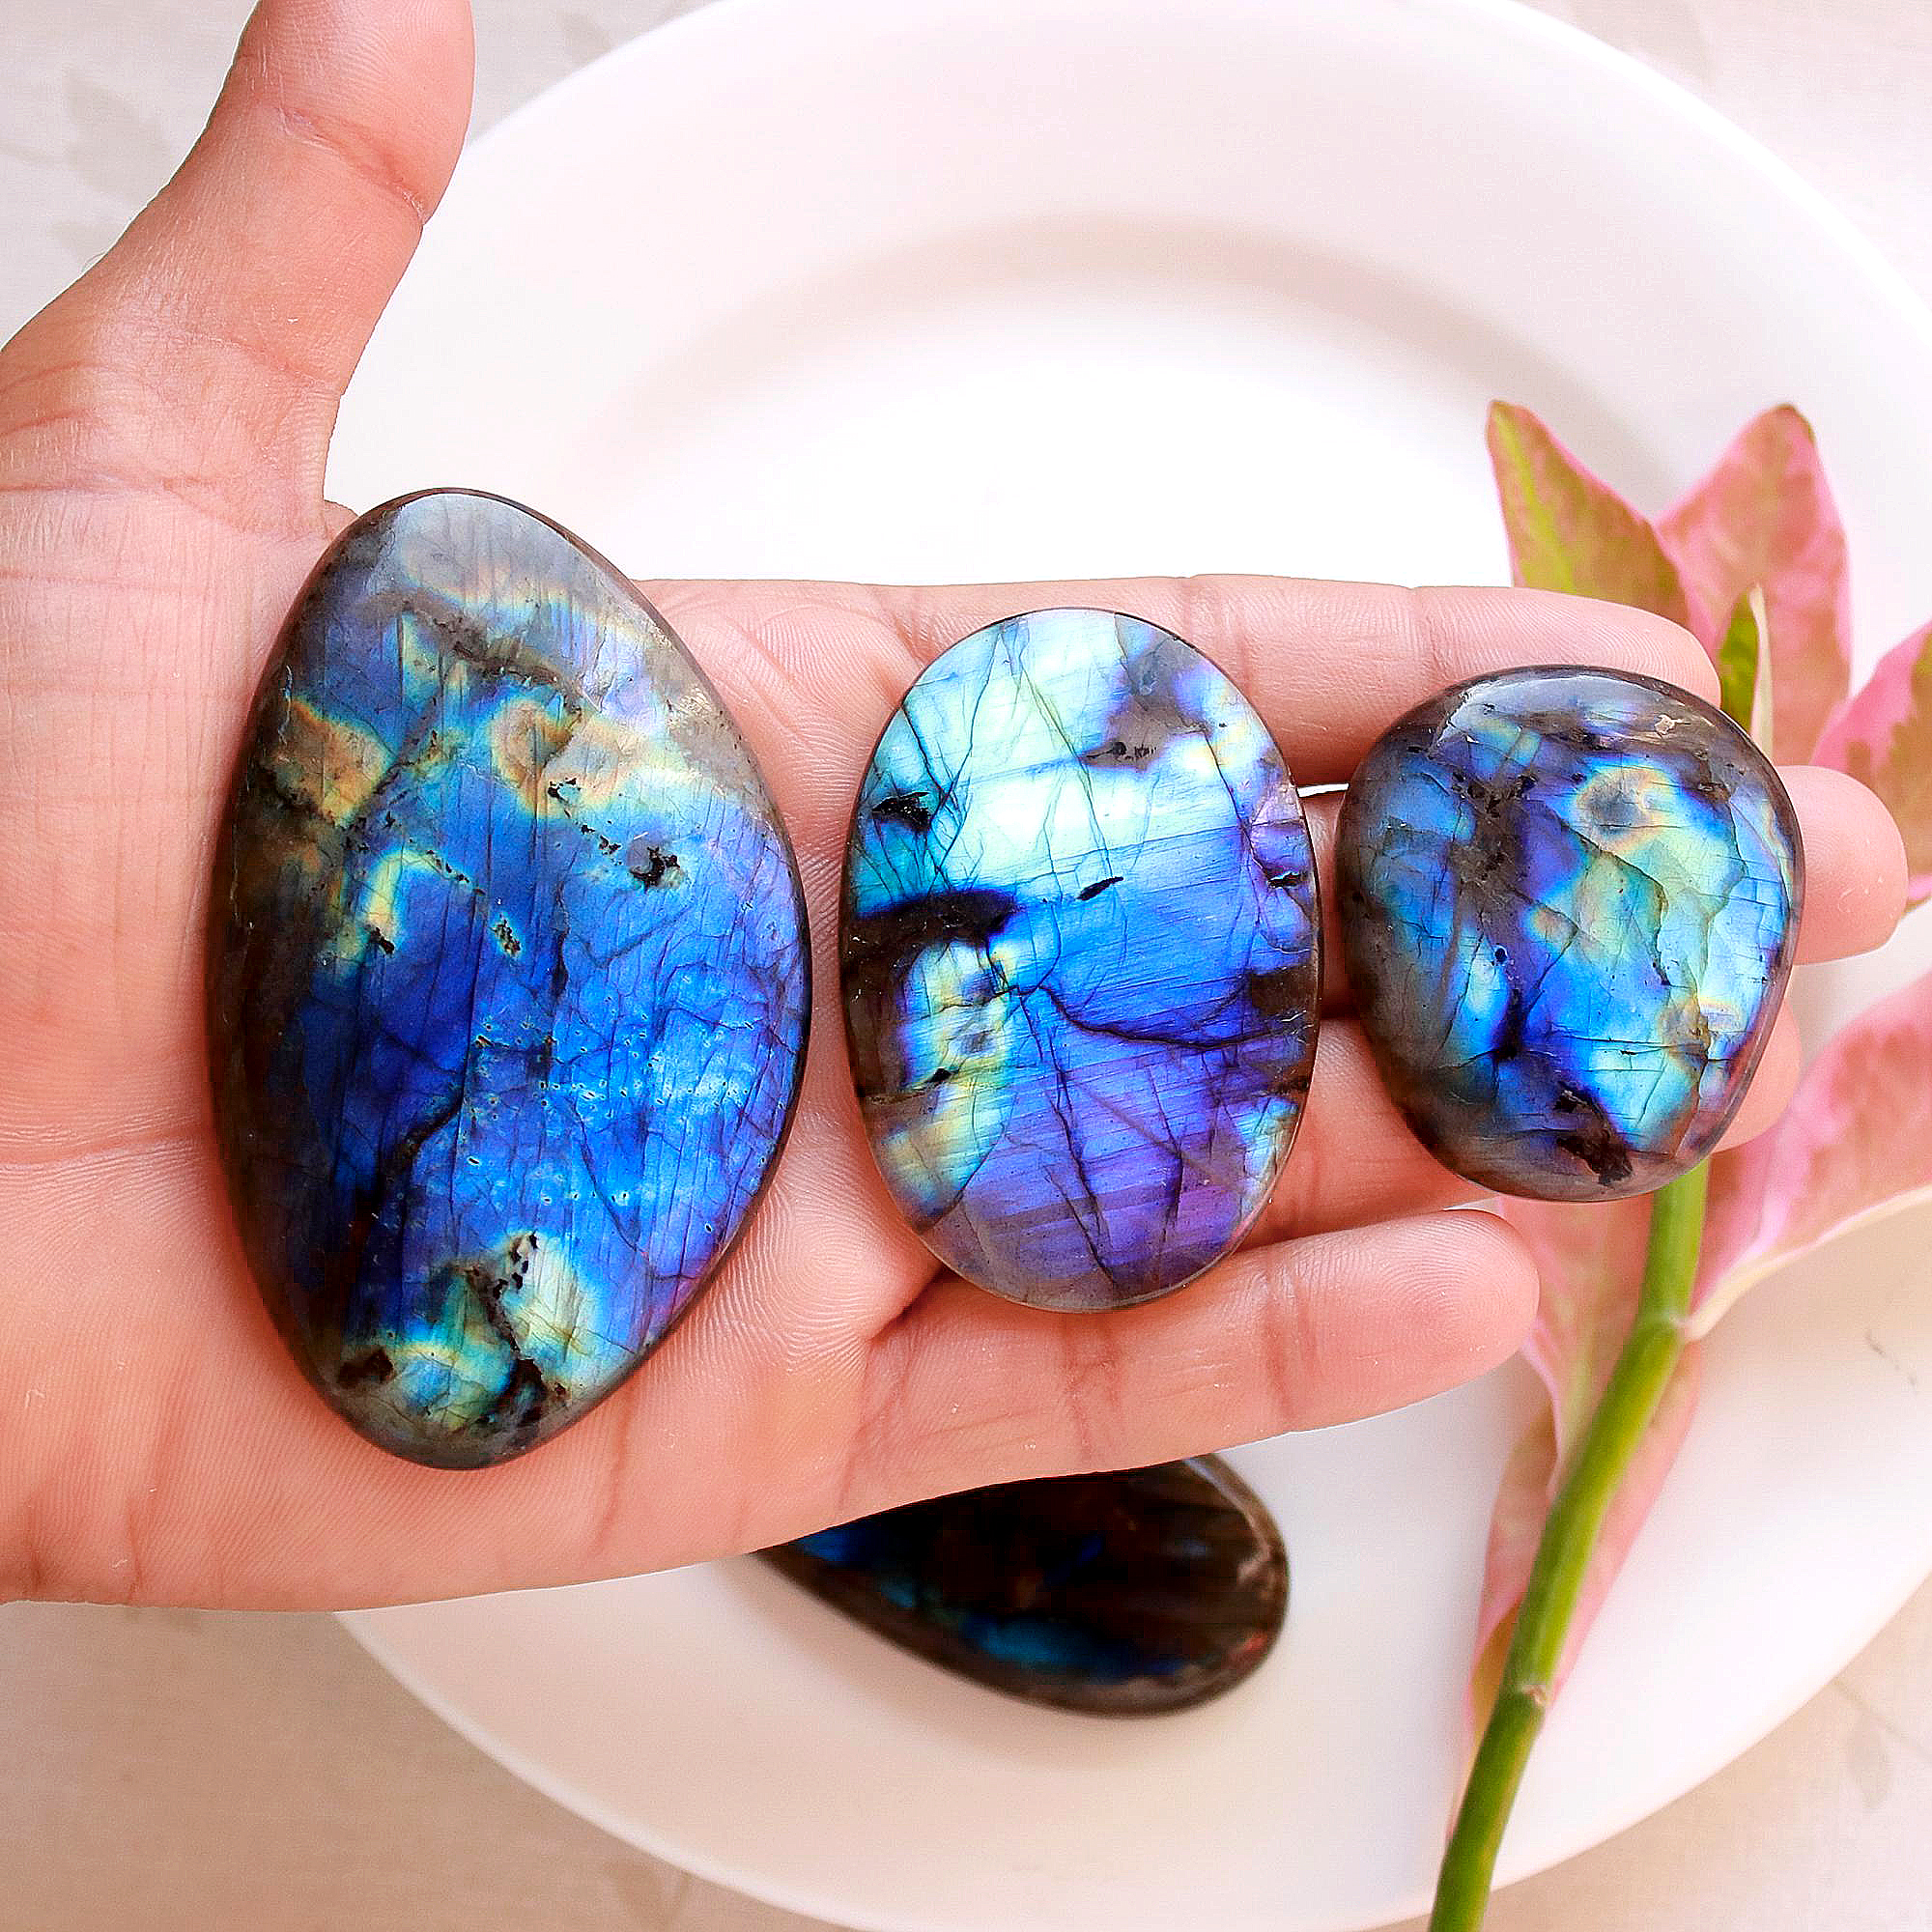 4 Pcs.525 Cts Natural labradorite Cabochon Loose Gemstone For Jewelry Wholesale Lot Size 75x46 42x38mm